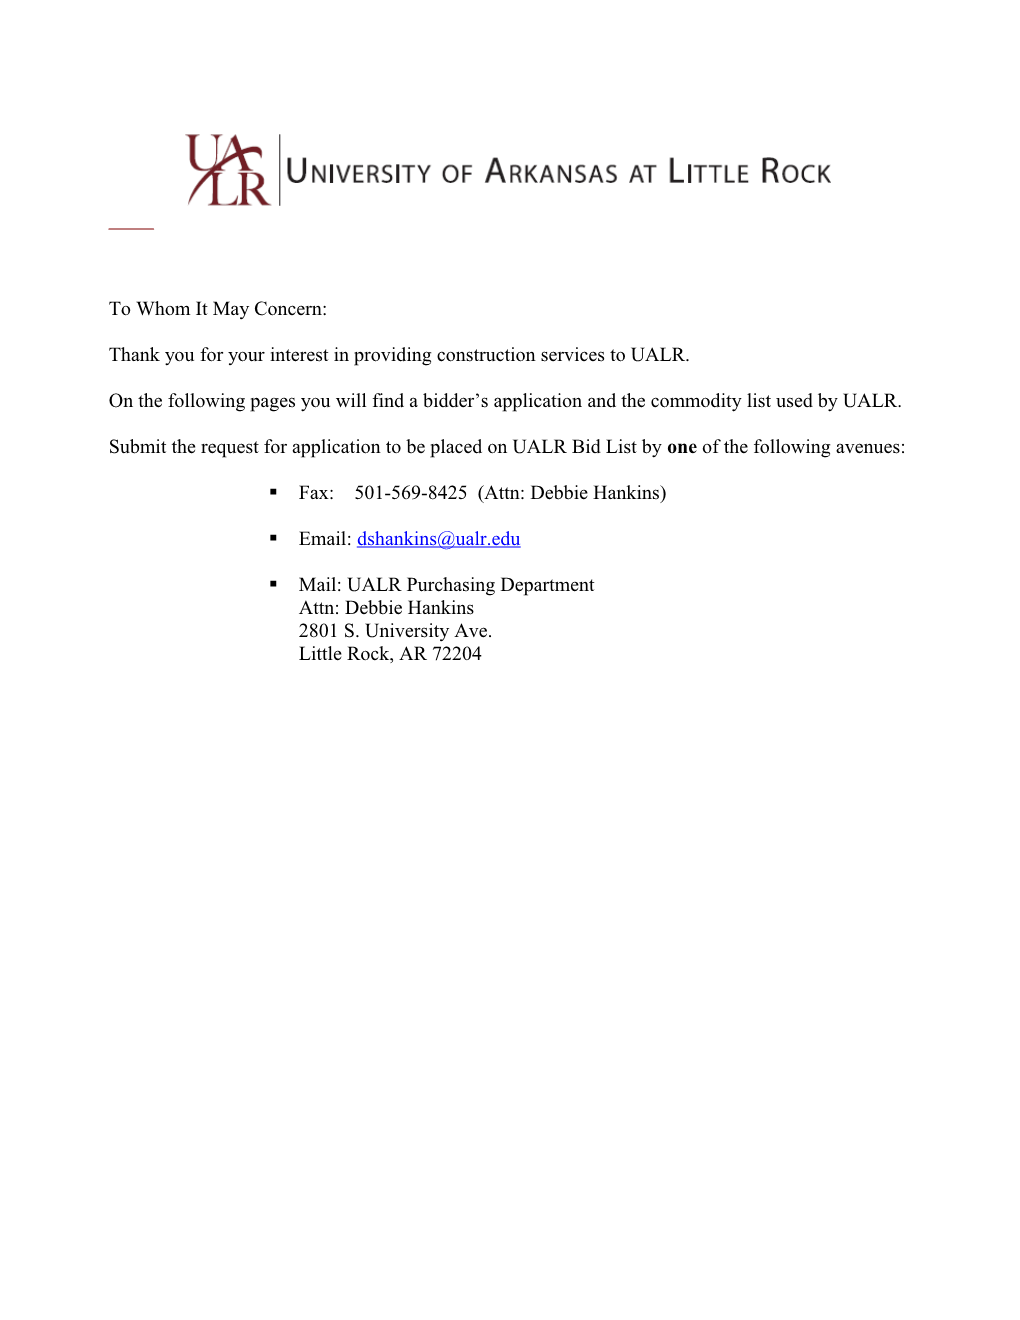 Thank You for Your Interest in Providing Construction Services to UALR